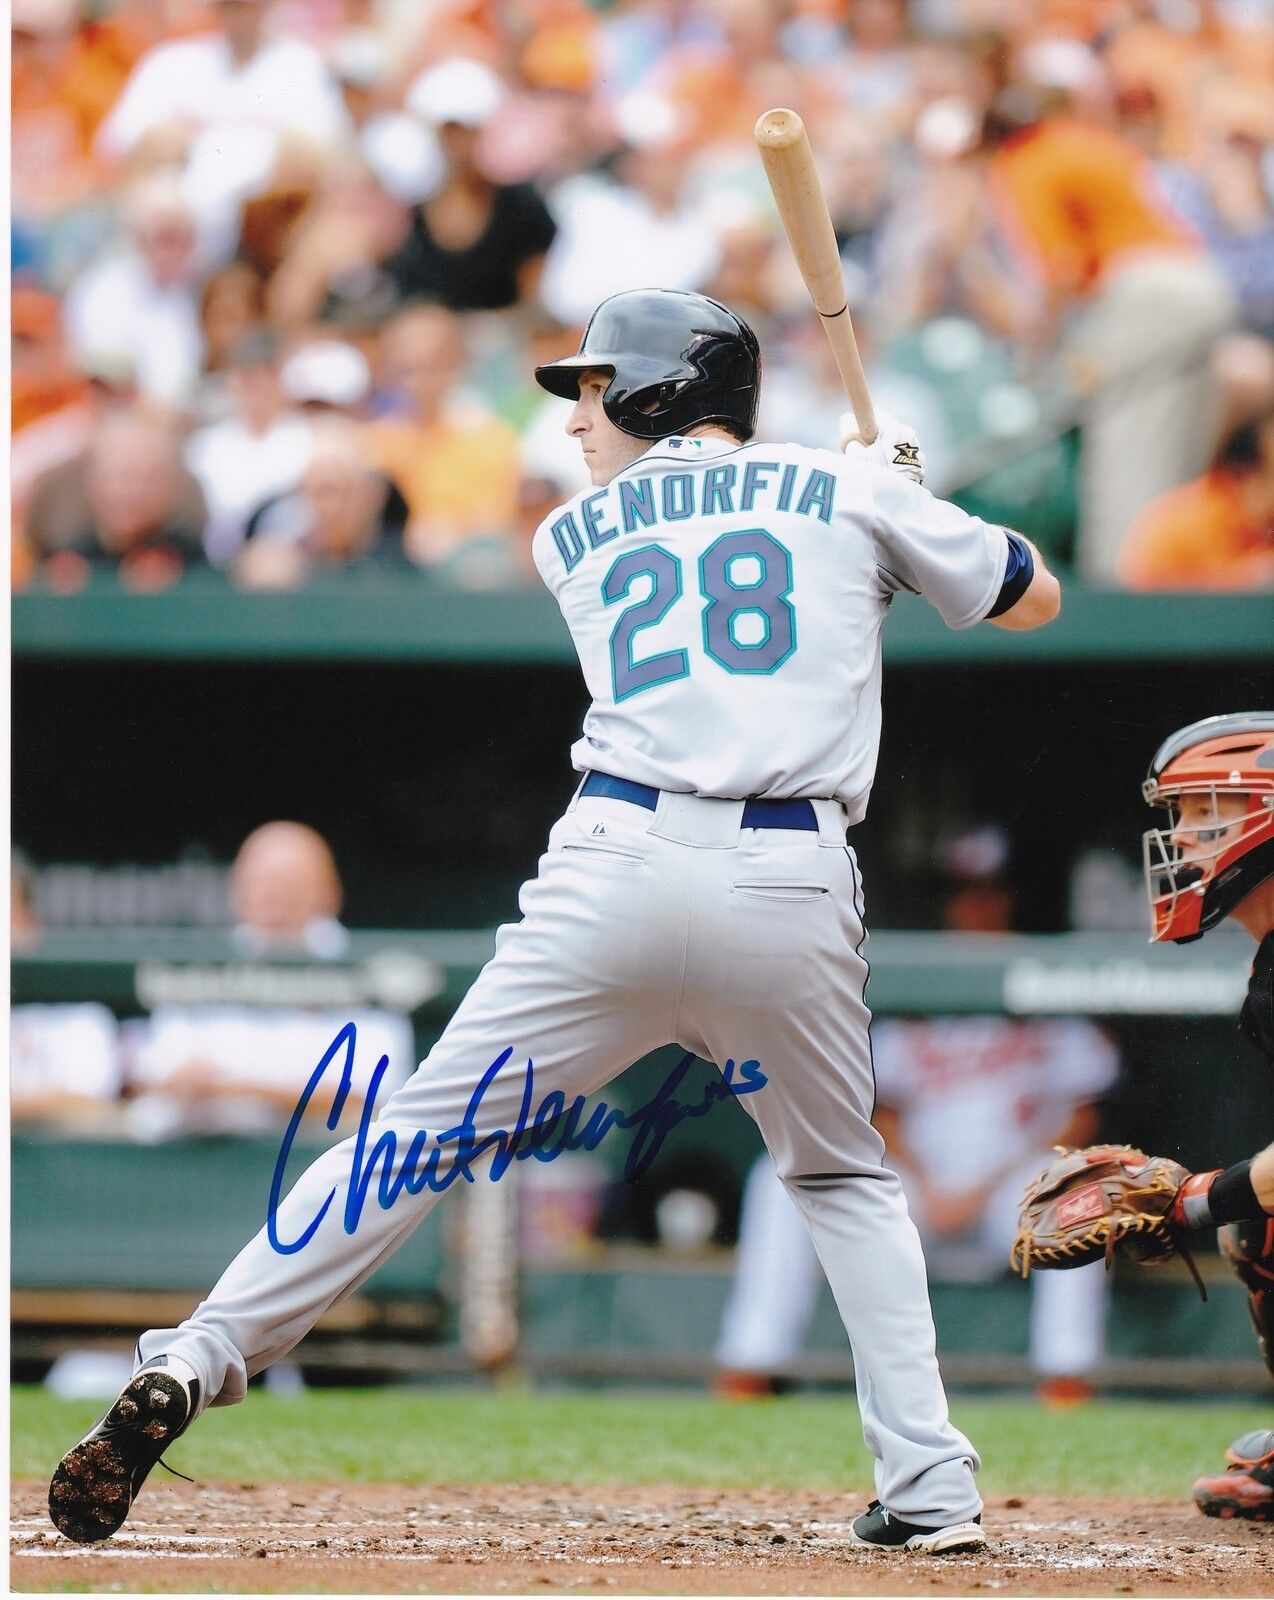 CHRIS DENORFIA SEATTLE MARINERS ACTION SIGNED 8x10